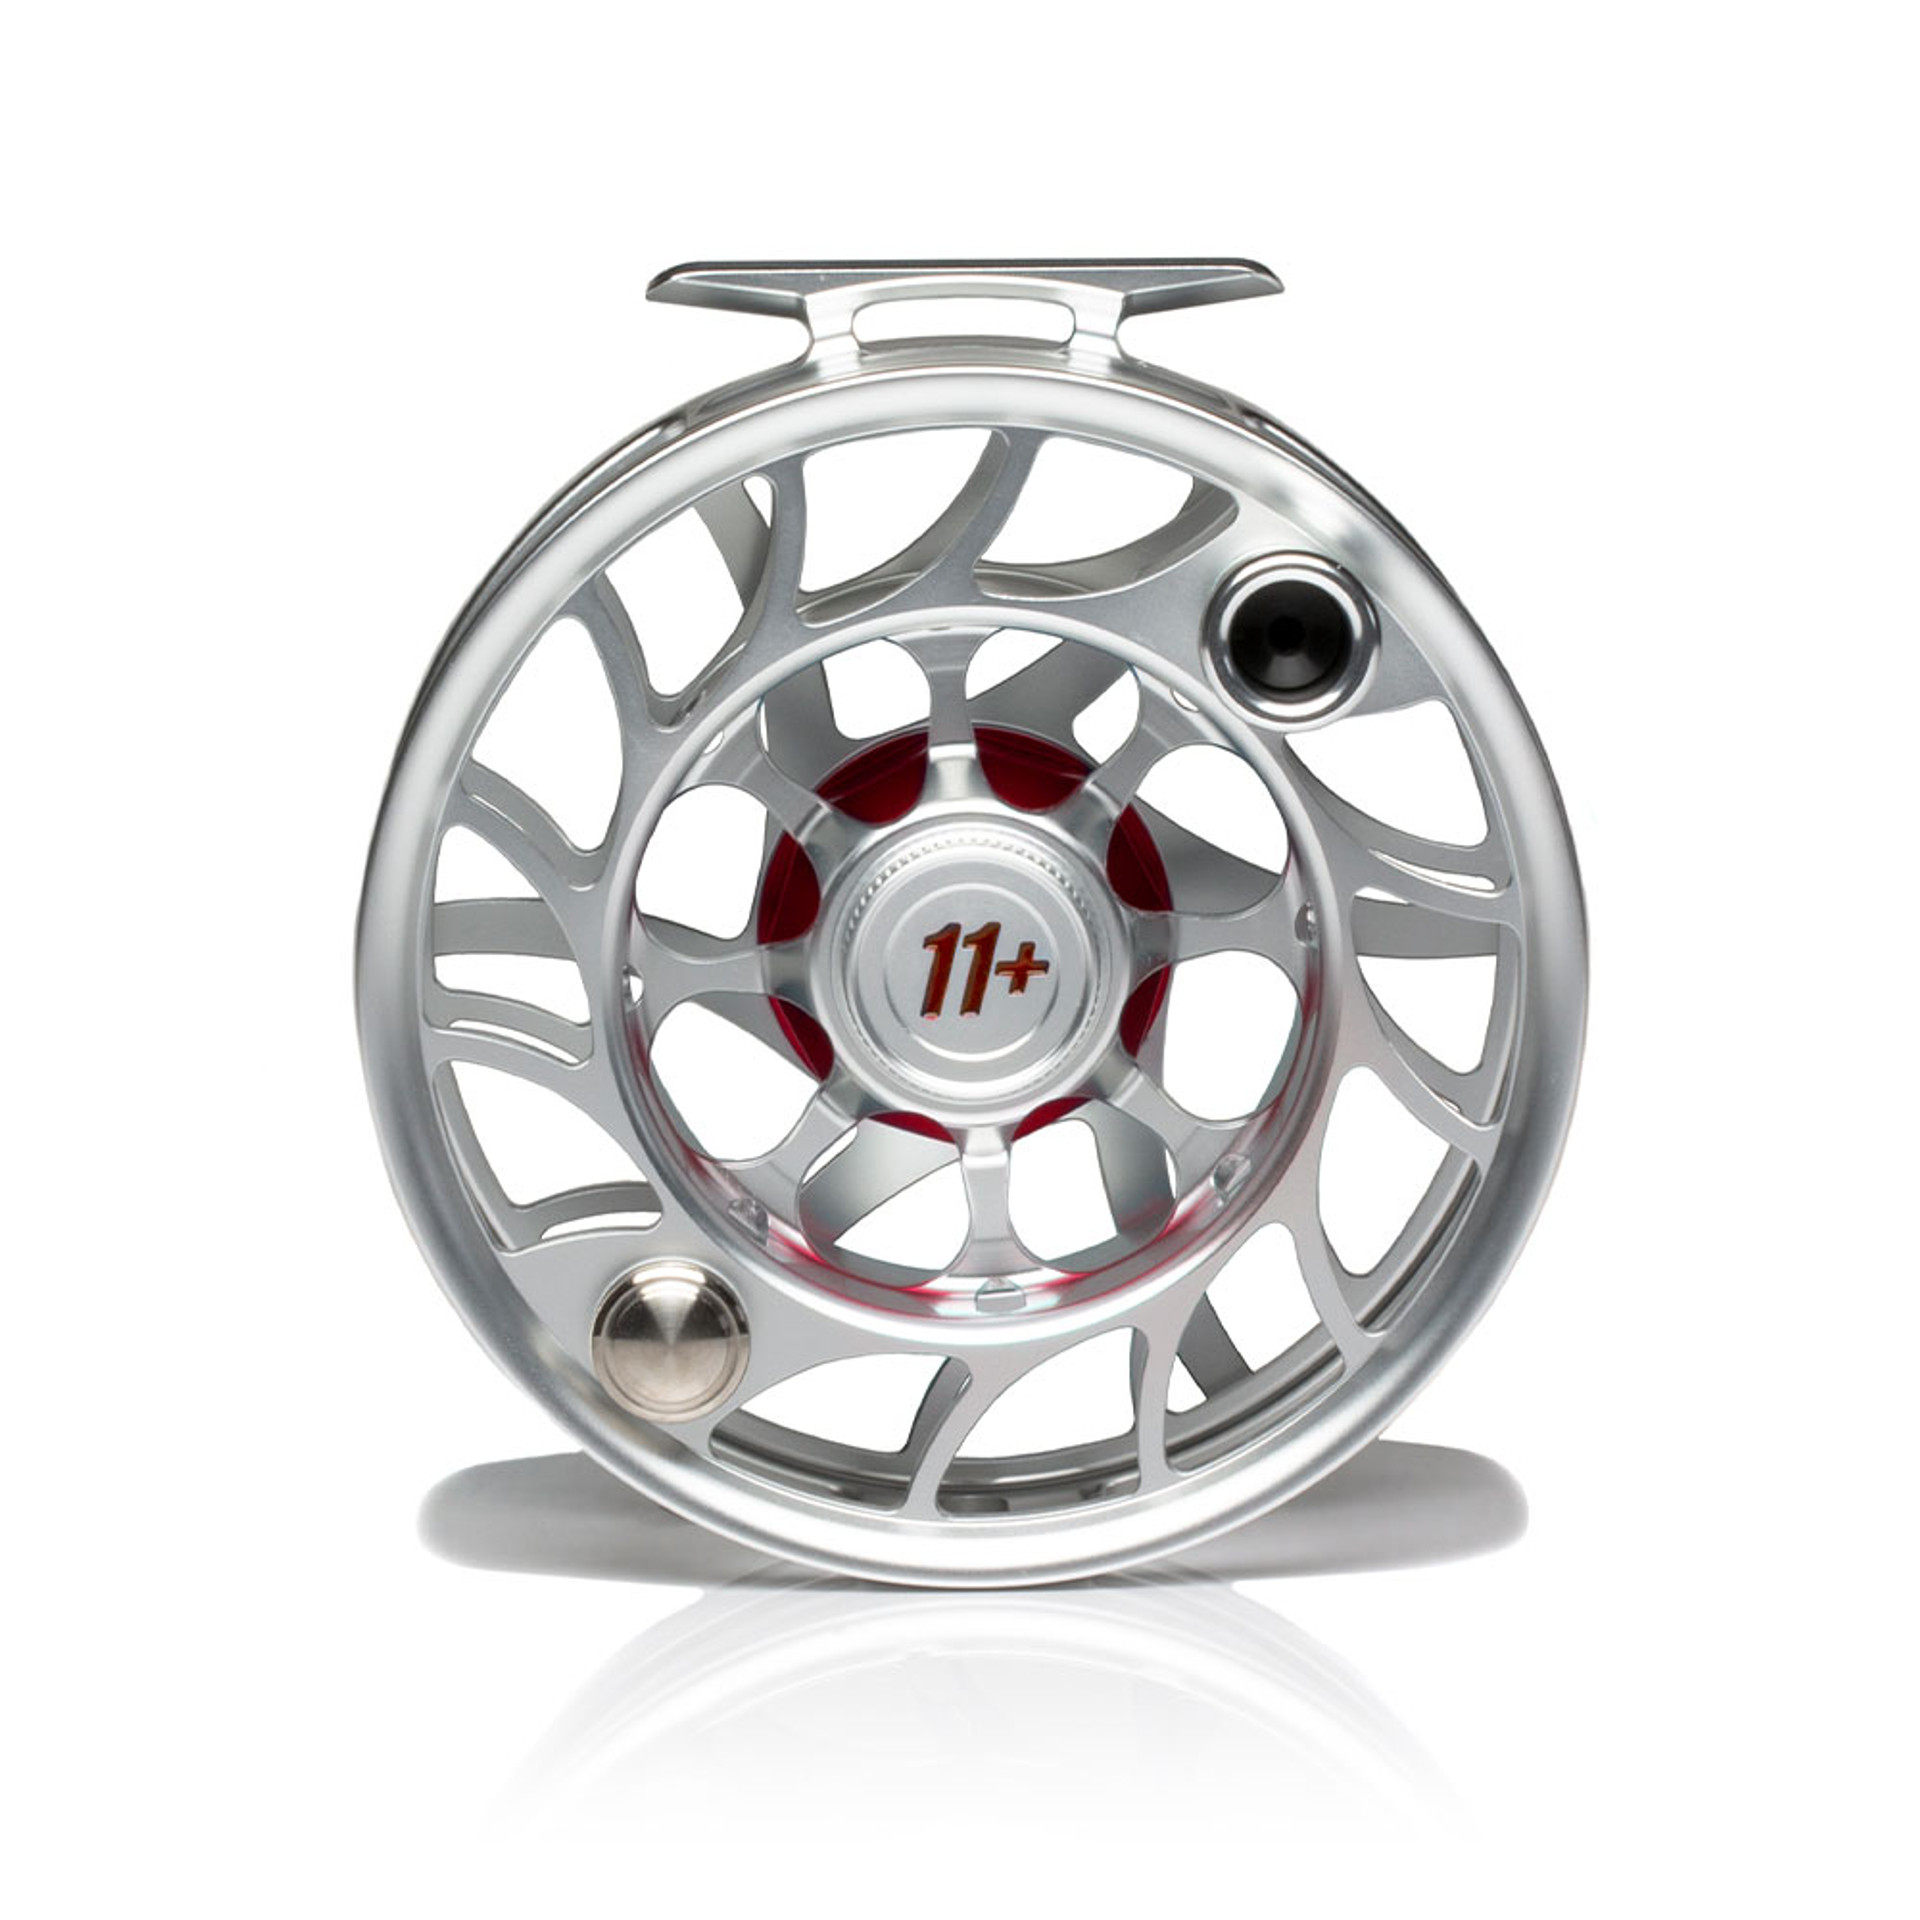 Hatch Iconic Reel 11 Plus - Western Rivers Flyfisher